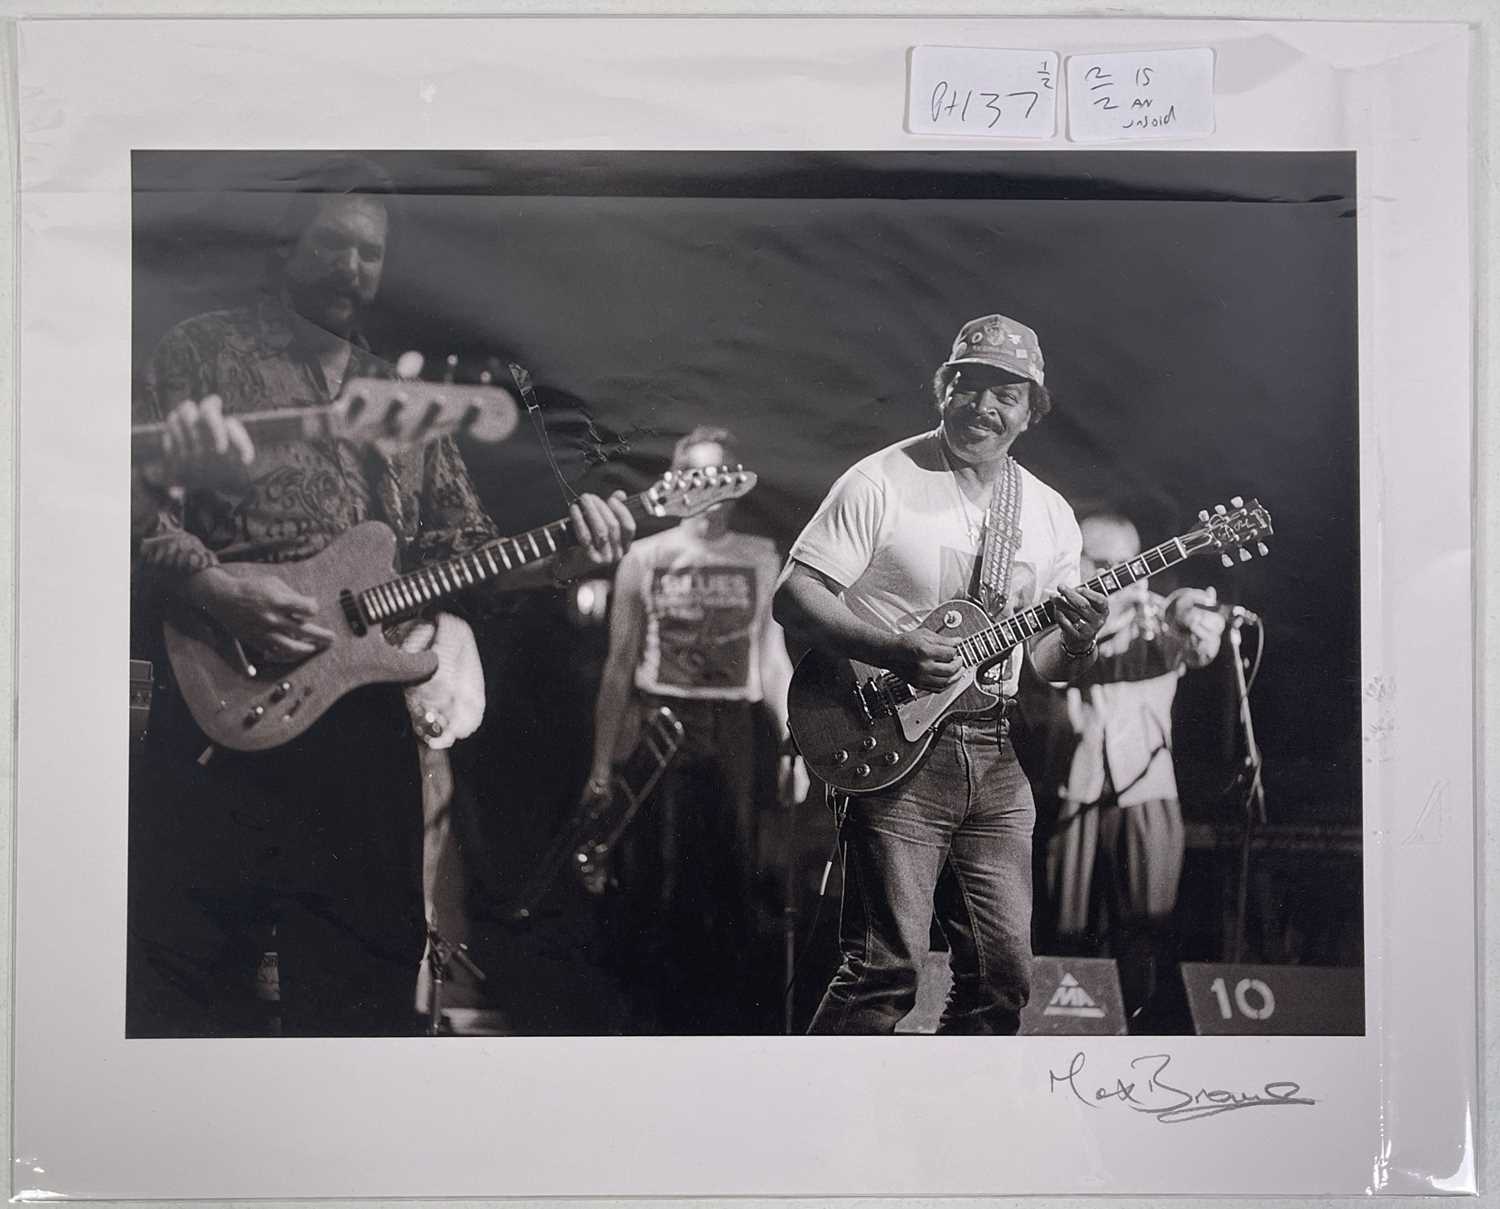 PHOTOGRAPHER SIGNED PRINTS - BLUES BROTHERS / STEVE CROPPER. - Image 3 of 4